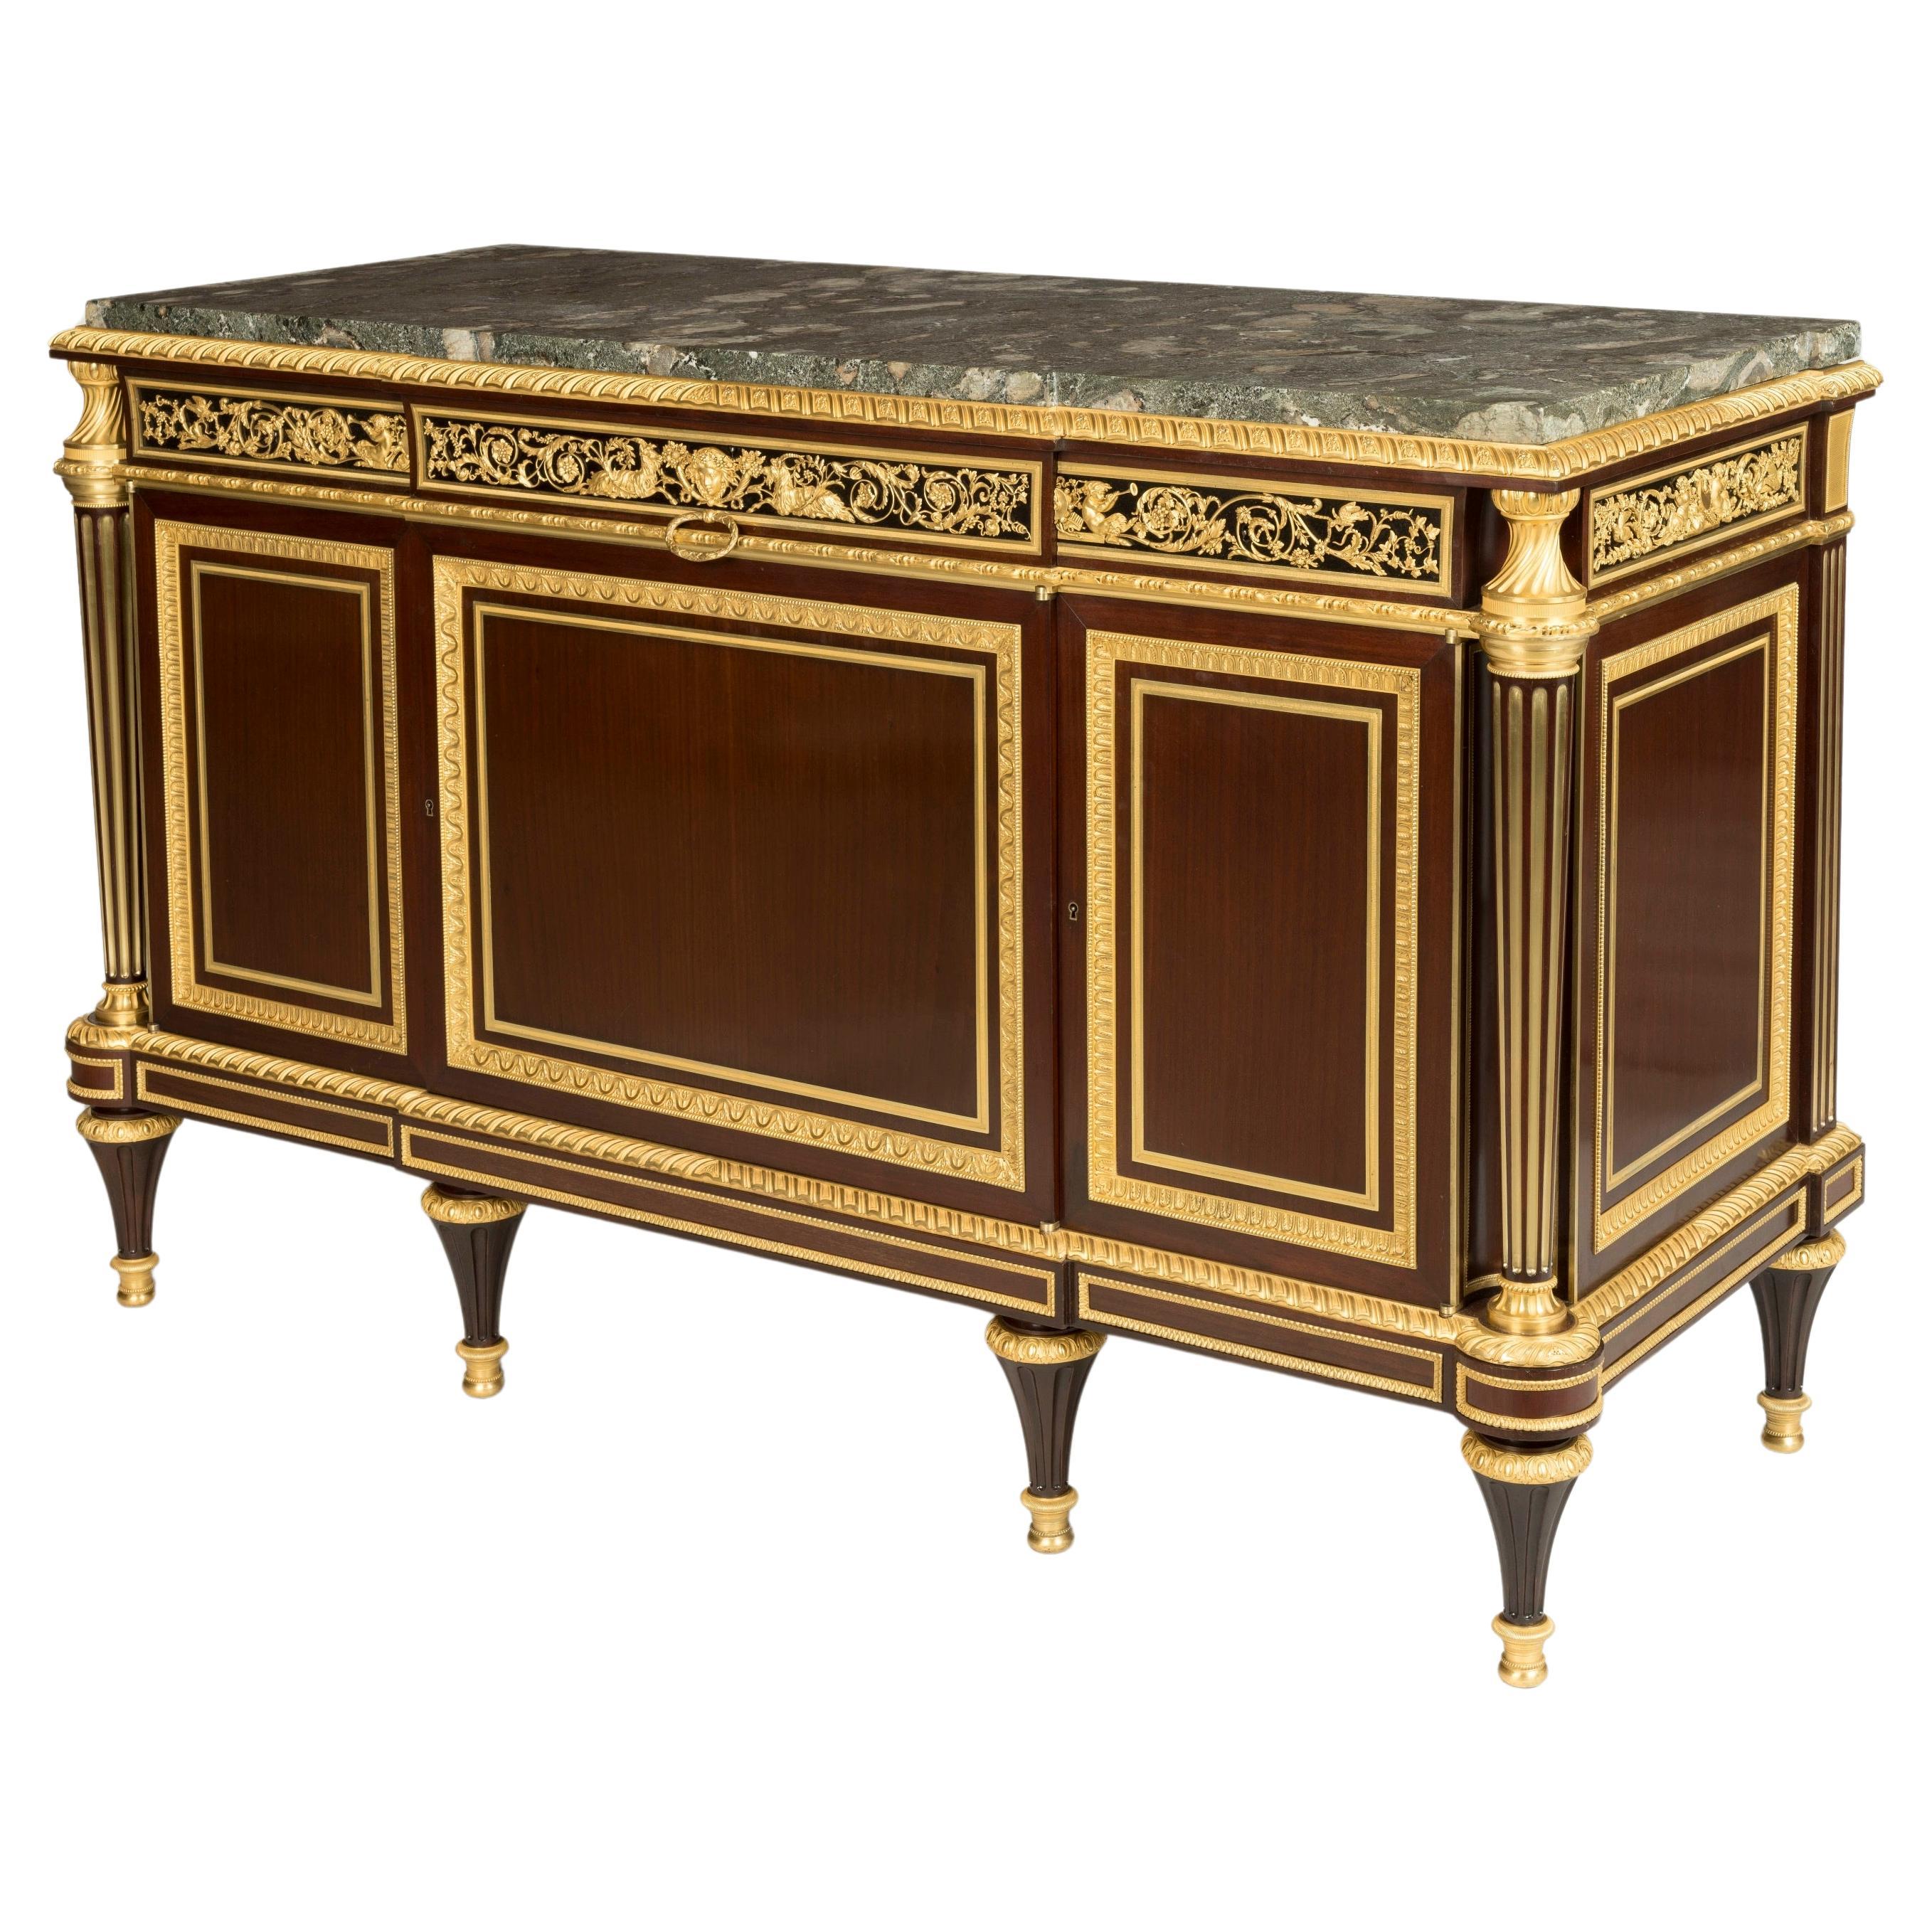 19th Century French Marble Top Commode in the Louis XVI Style by Henry Dasson For Sale